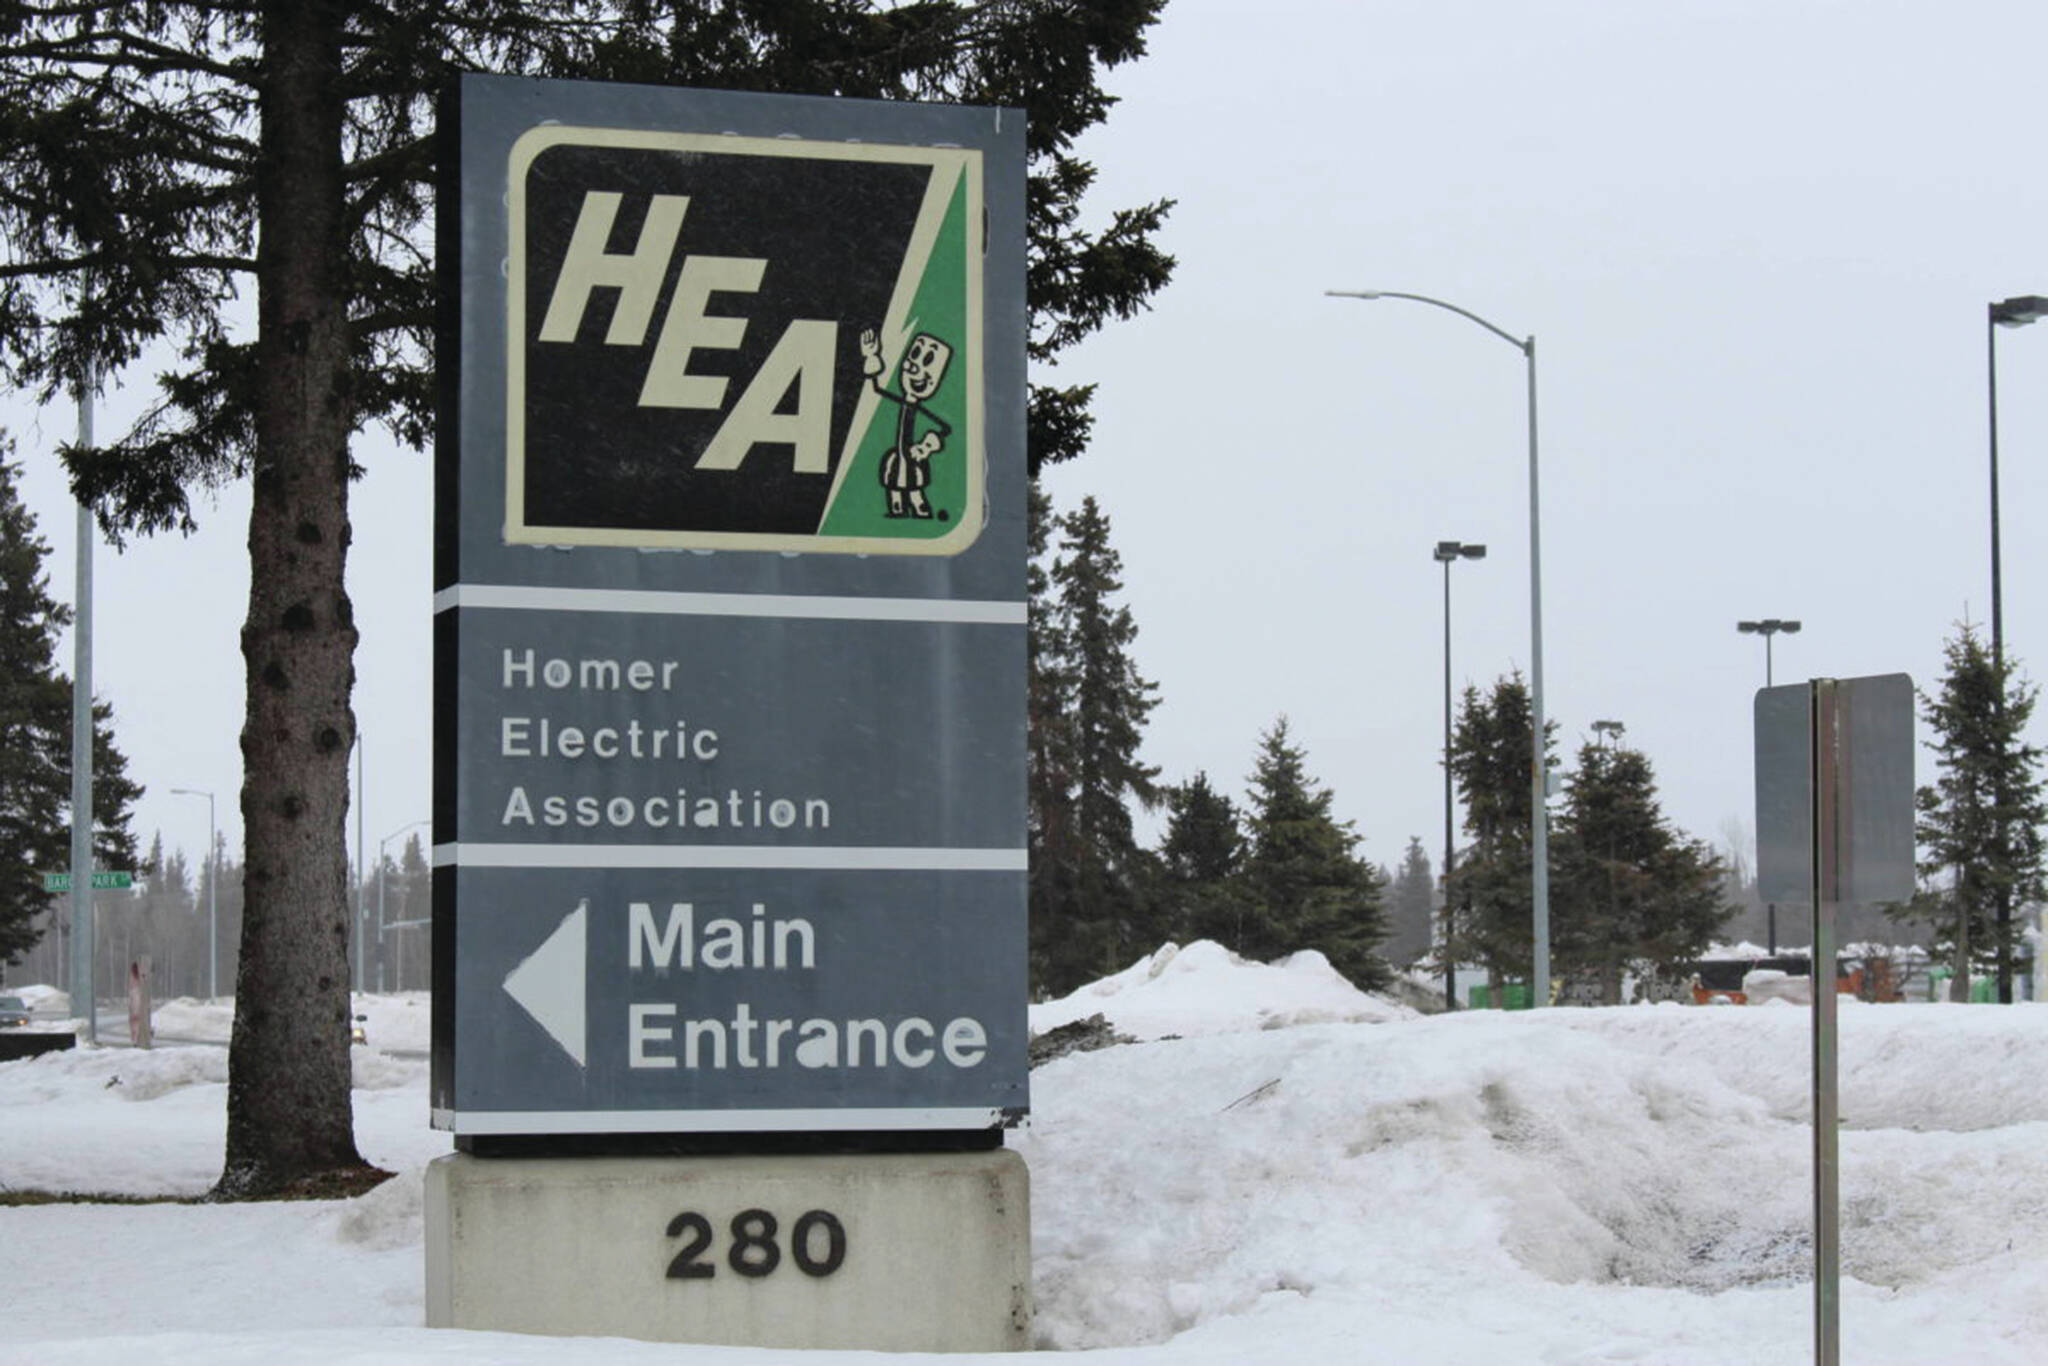 The sign in front of the Homer Electric Association building in Kenai, Alaska, as seen on April 1, 2020. (Photo by Brian Mazurek/Peninsula Clarion)